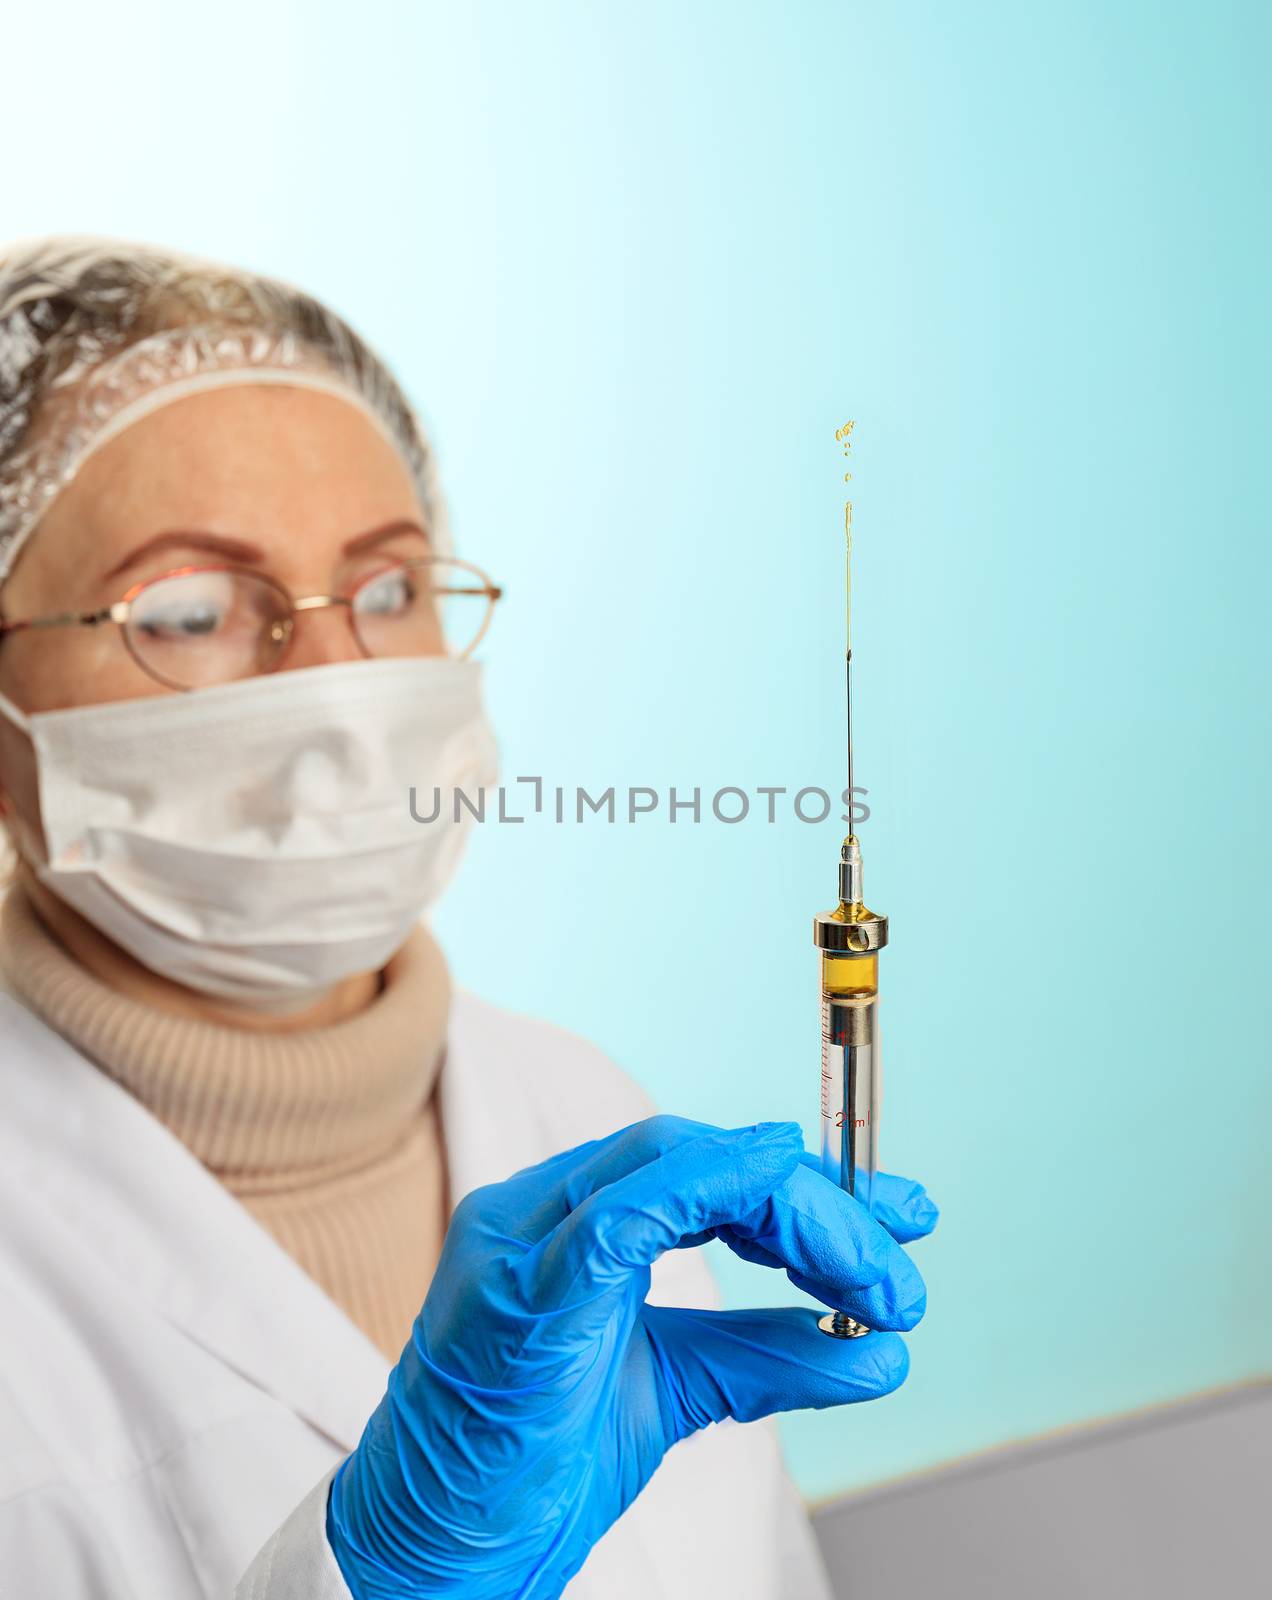 A small injection syringe in the doctor s hand in a latex medical glove and a face mask. Virus protection concept. Medical theme on a light turquoise background. by Sergii